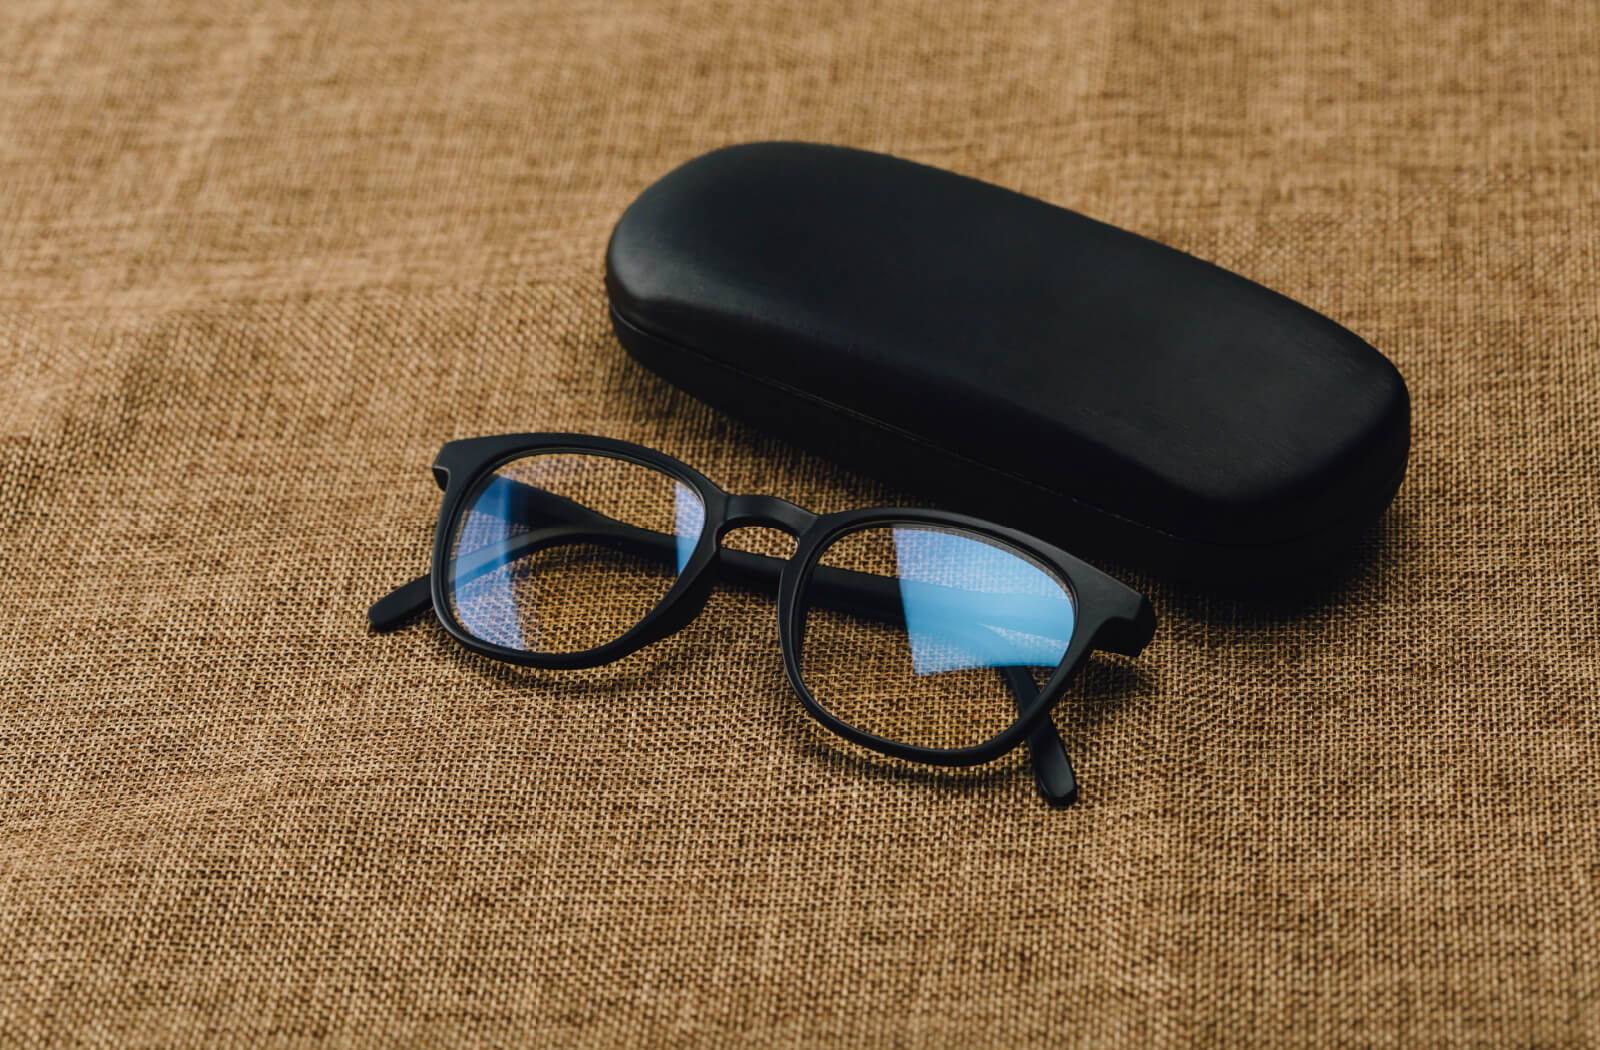 A pair of glasses with UV protection lens coating beside a hard glasses case.